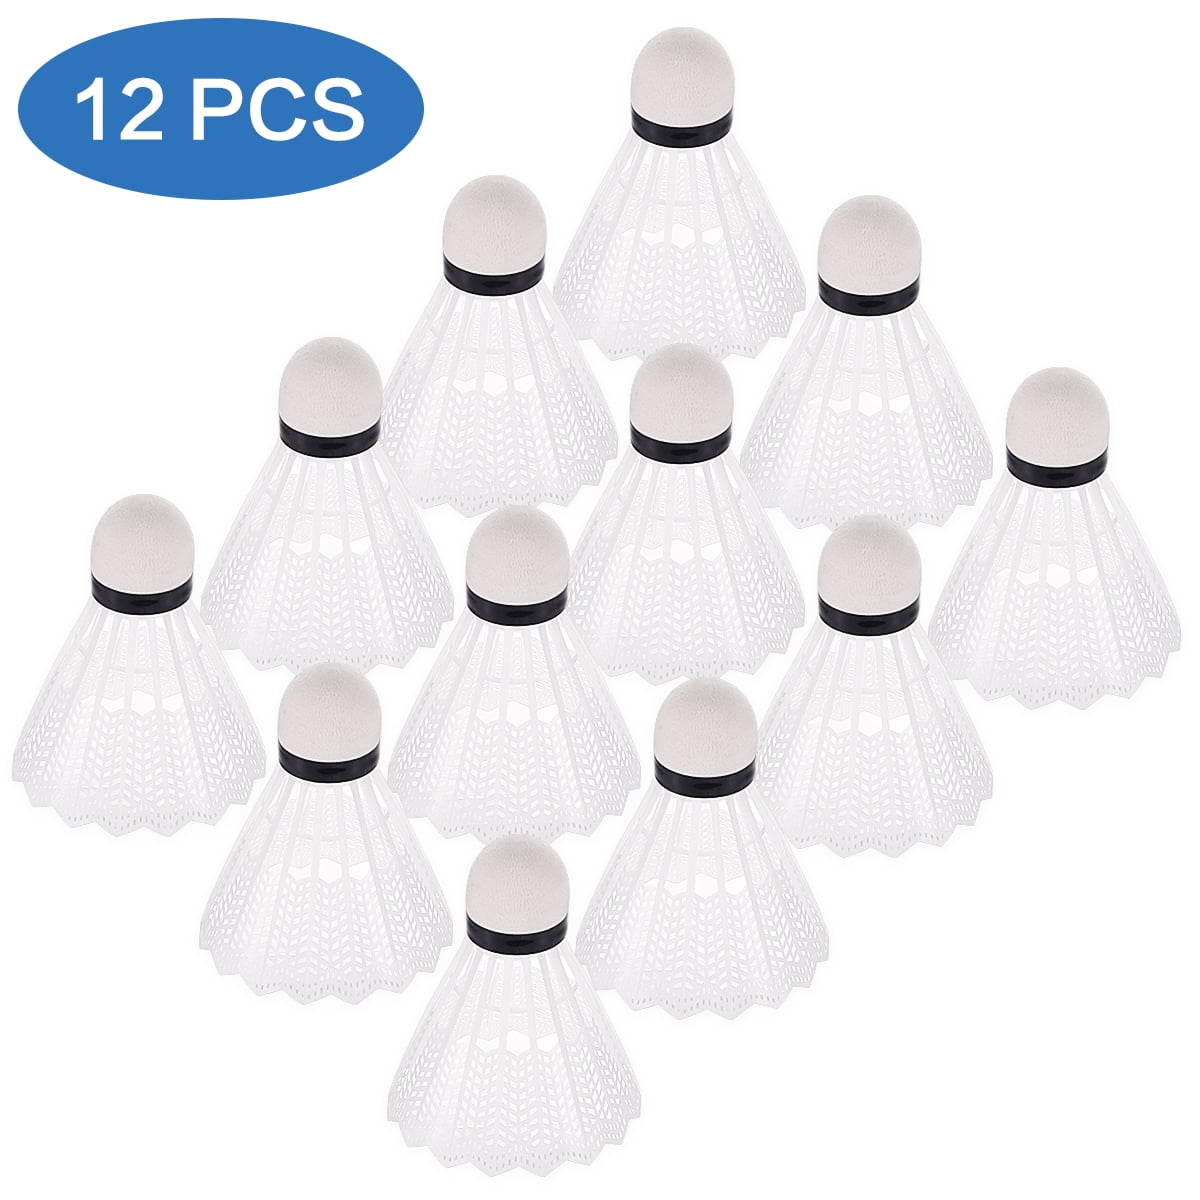 White Badminton Plastic Shuttlecocks Outdoor Indoor Gym Sports Accessories 12Pcs 